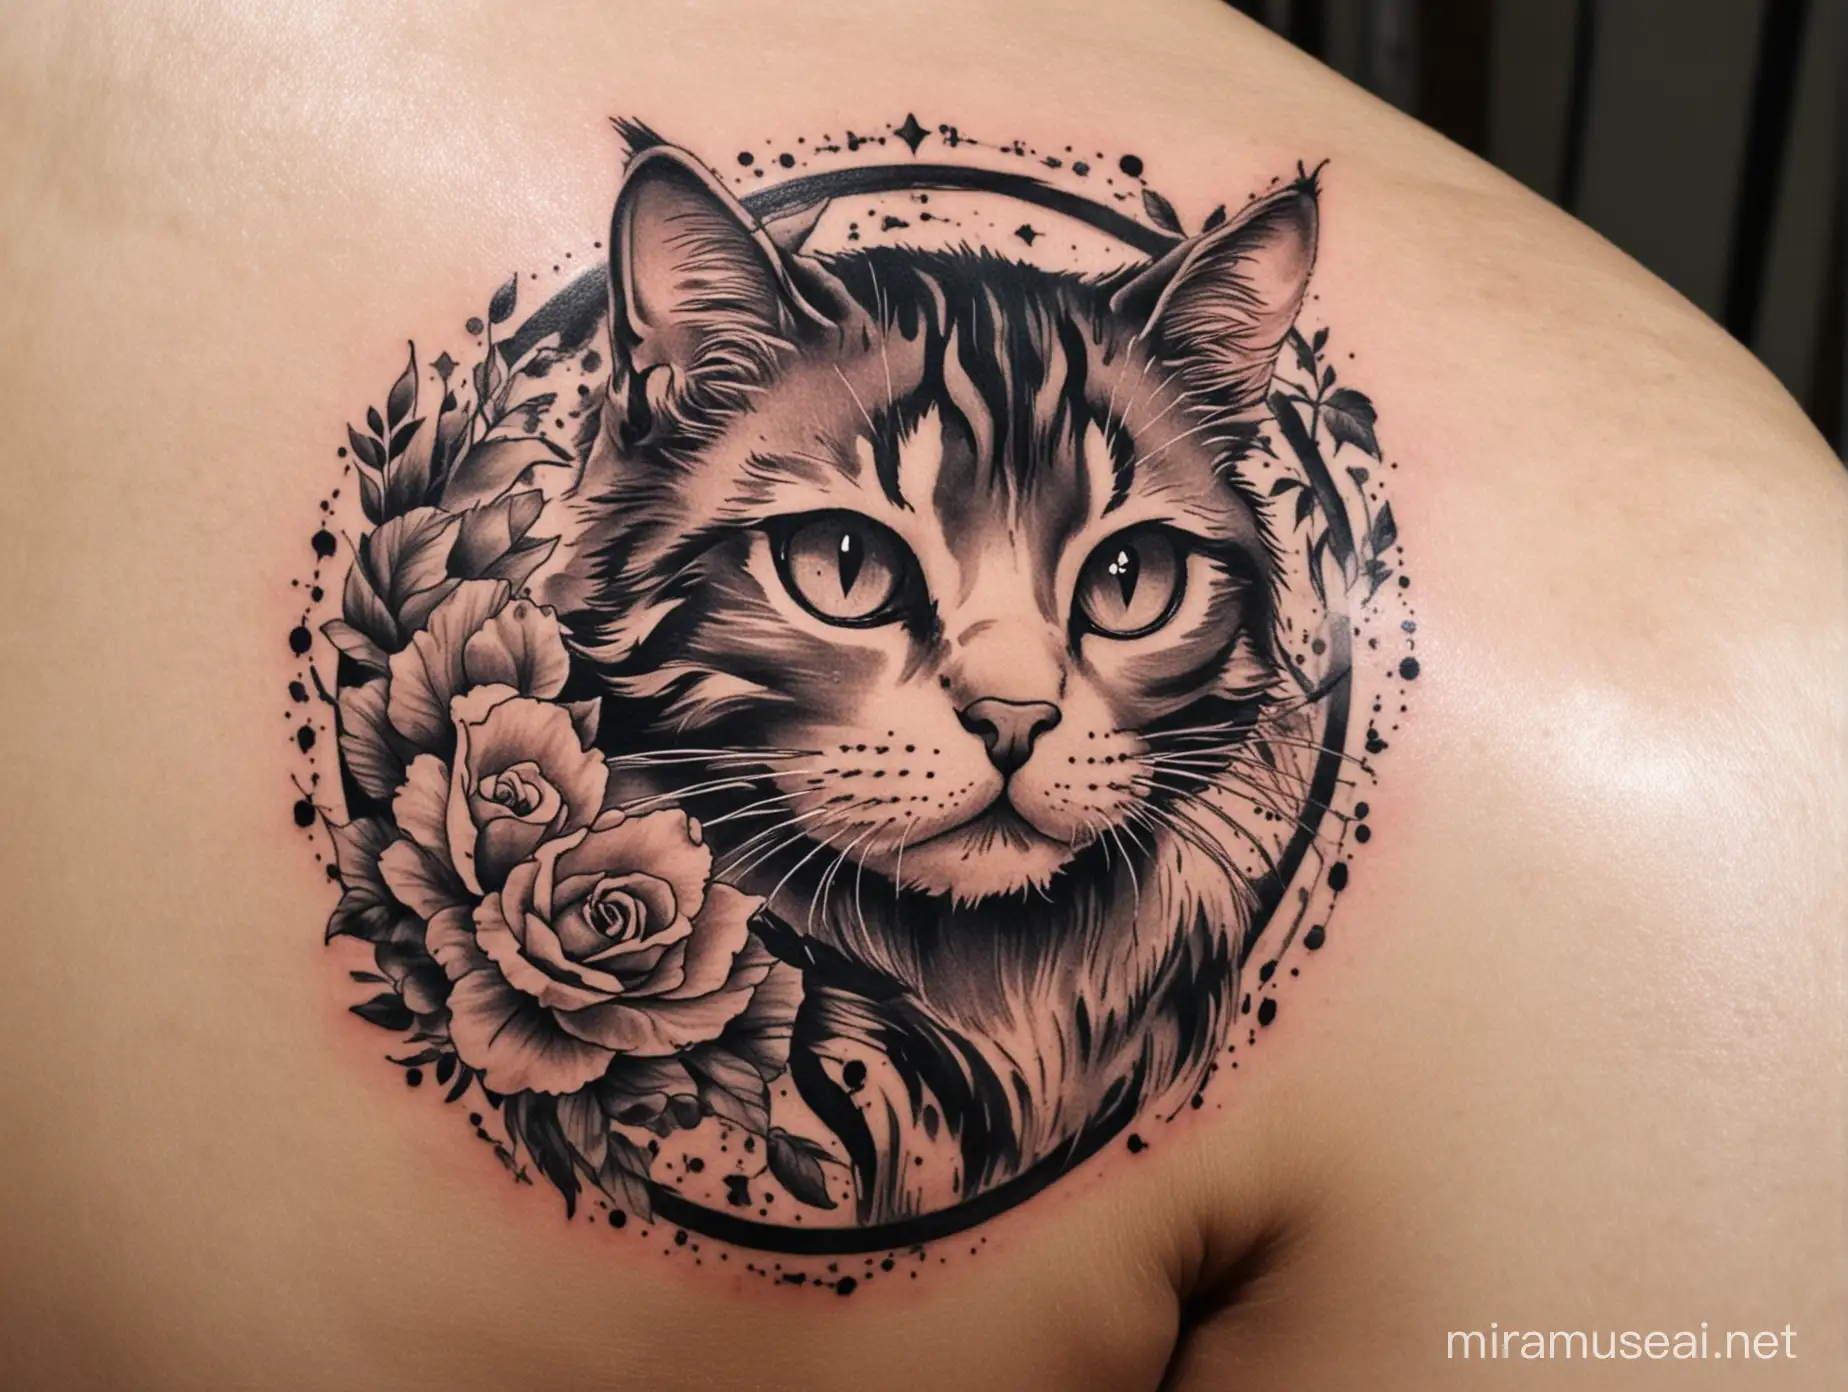 FelineInspired Tattoo Design Featuring Intricate Patterns and Playful Imagery